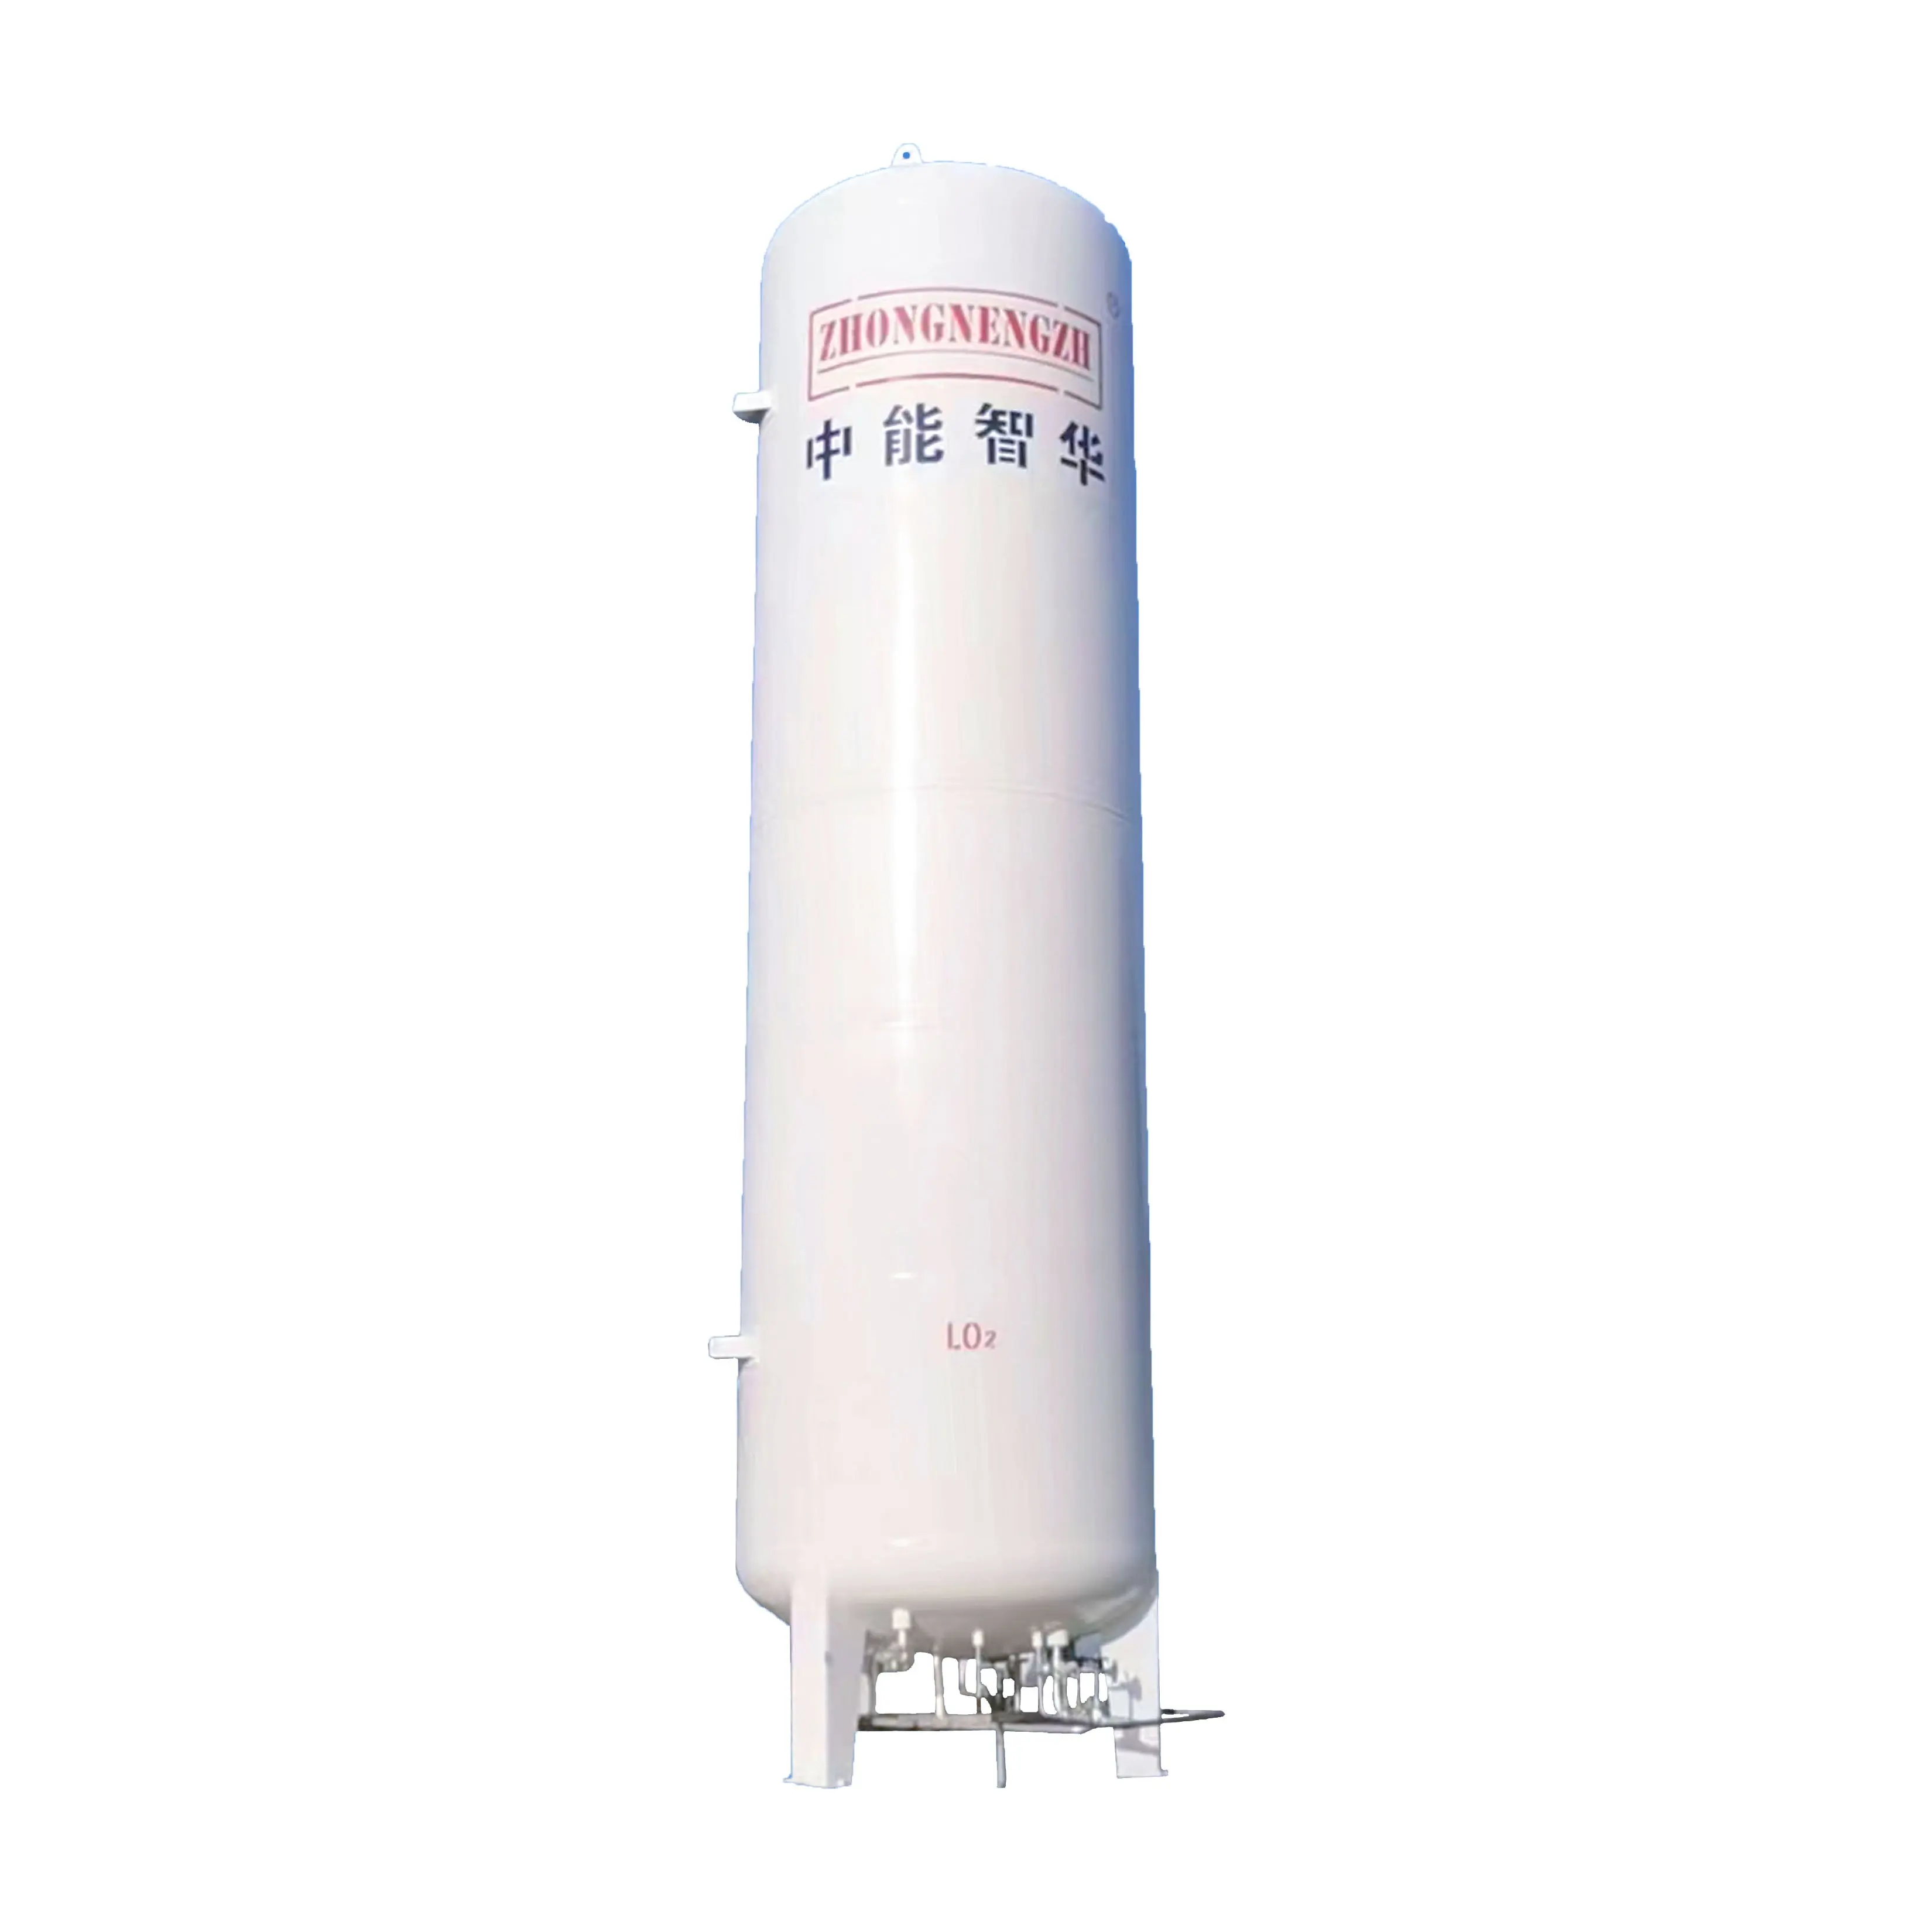 CNZH-100 LO2 Cryogenic Storage Tank for Liquid Oxygen use in Industry Metal Cutting and Welding